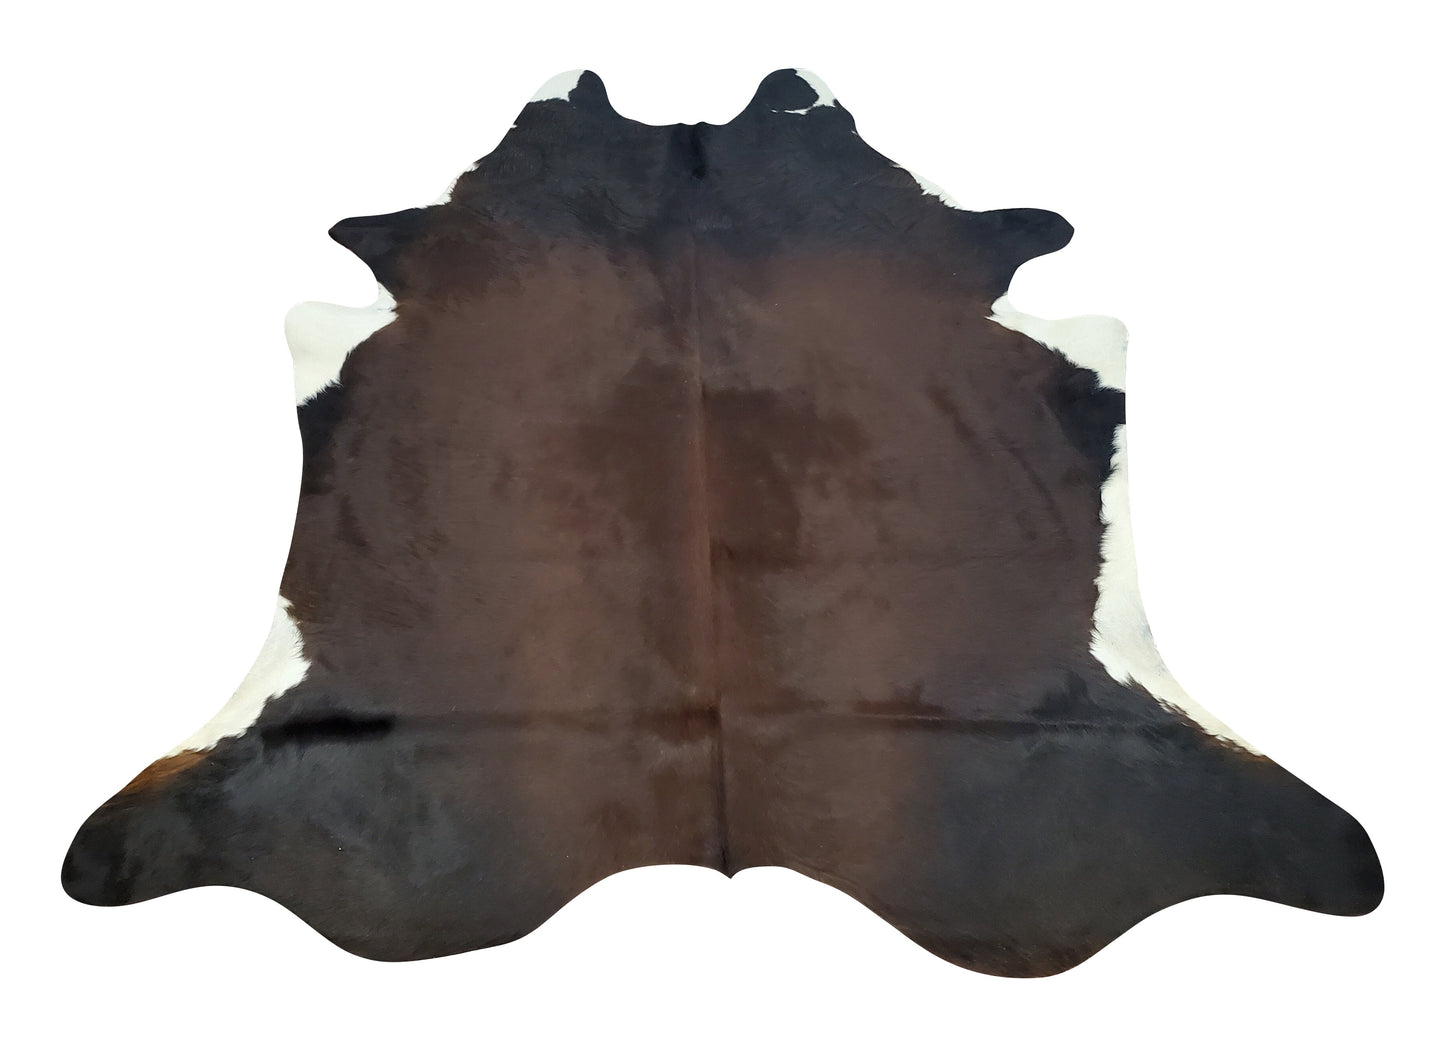 Chocolate cowhide rug in living room will give both natural and boho vibes